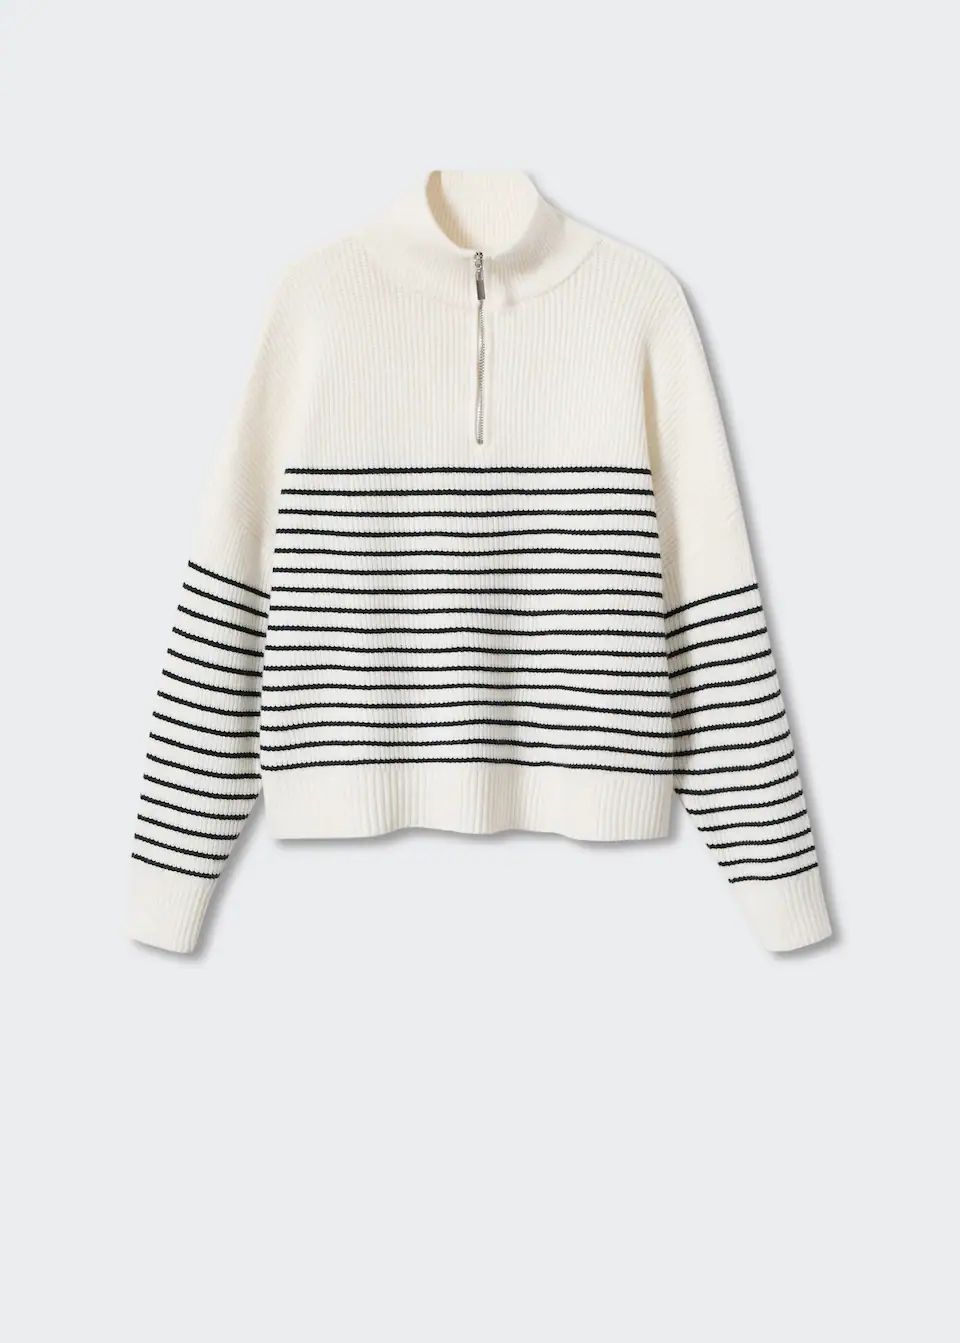 Striped knit sweater

Thick knitted fabric. High collar. Neck closure. Oversize design. Standard des | MANGO (US)